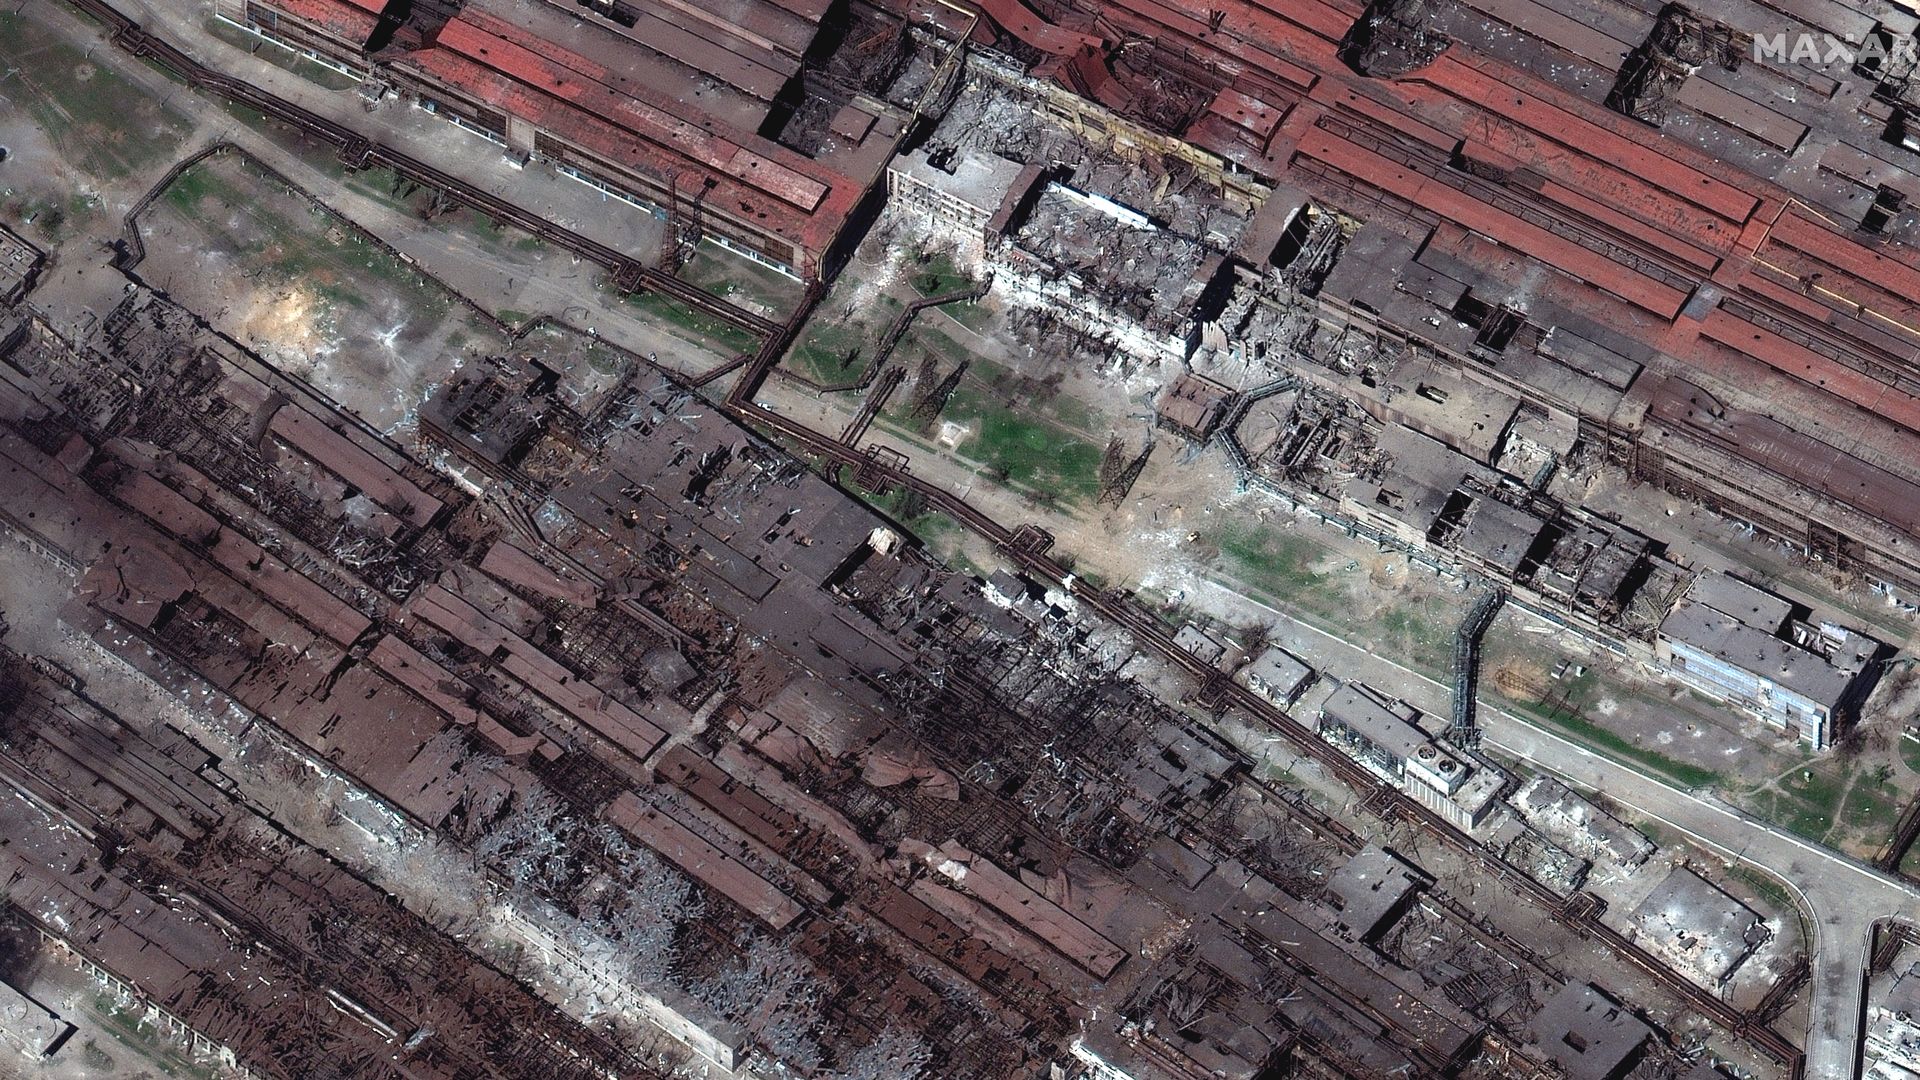 A satellite image overview of the Azovstal steel plant collected on April 29.